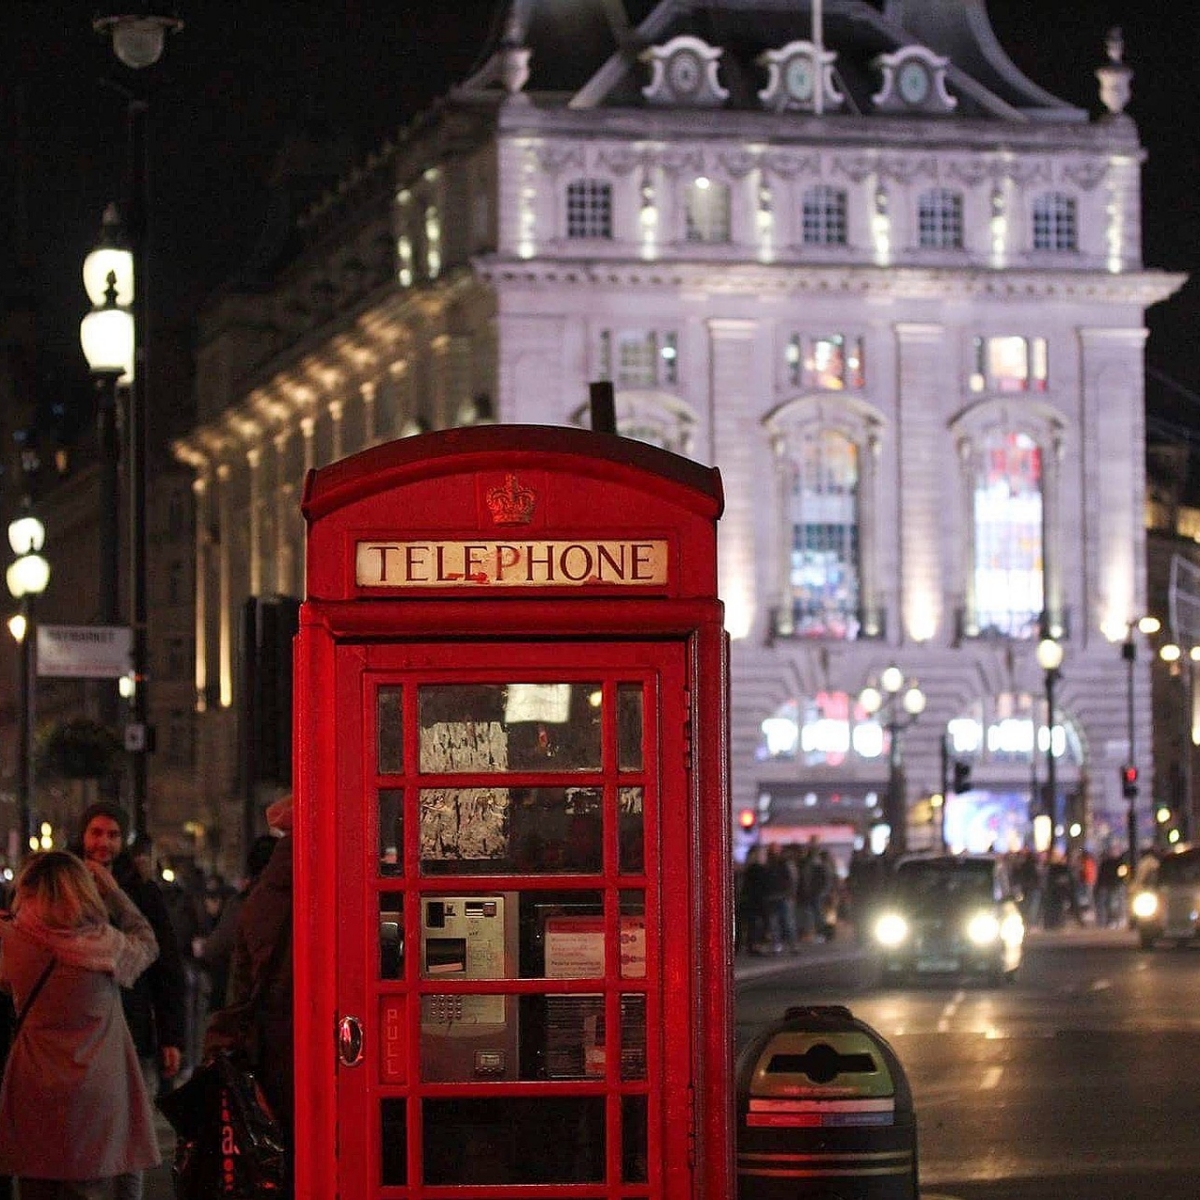 Red telephone box in London at night